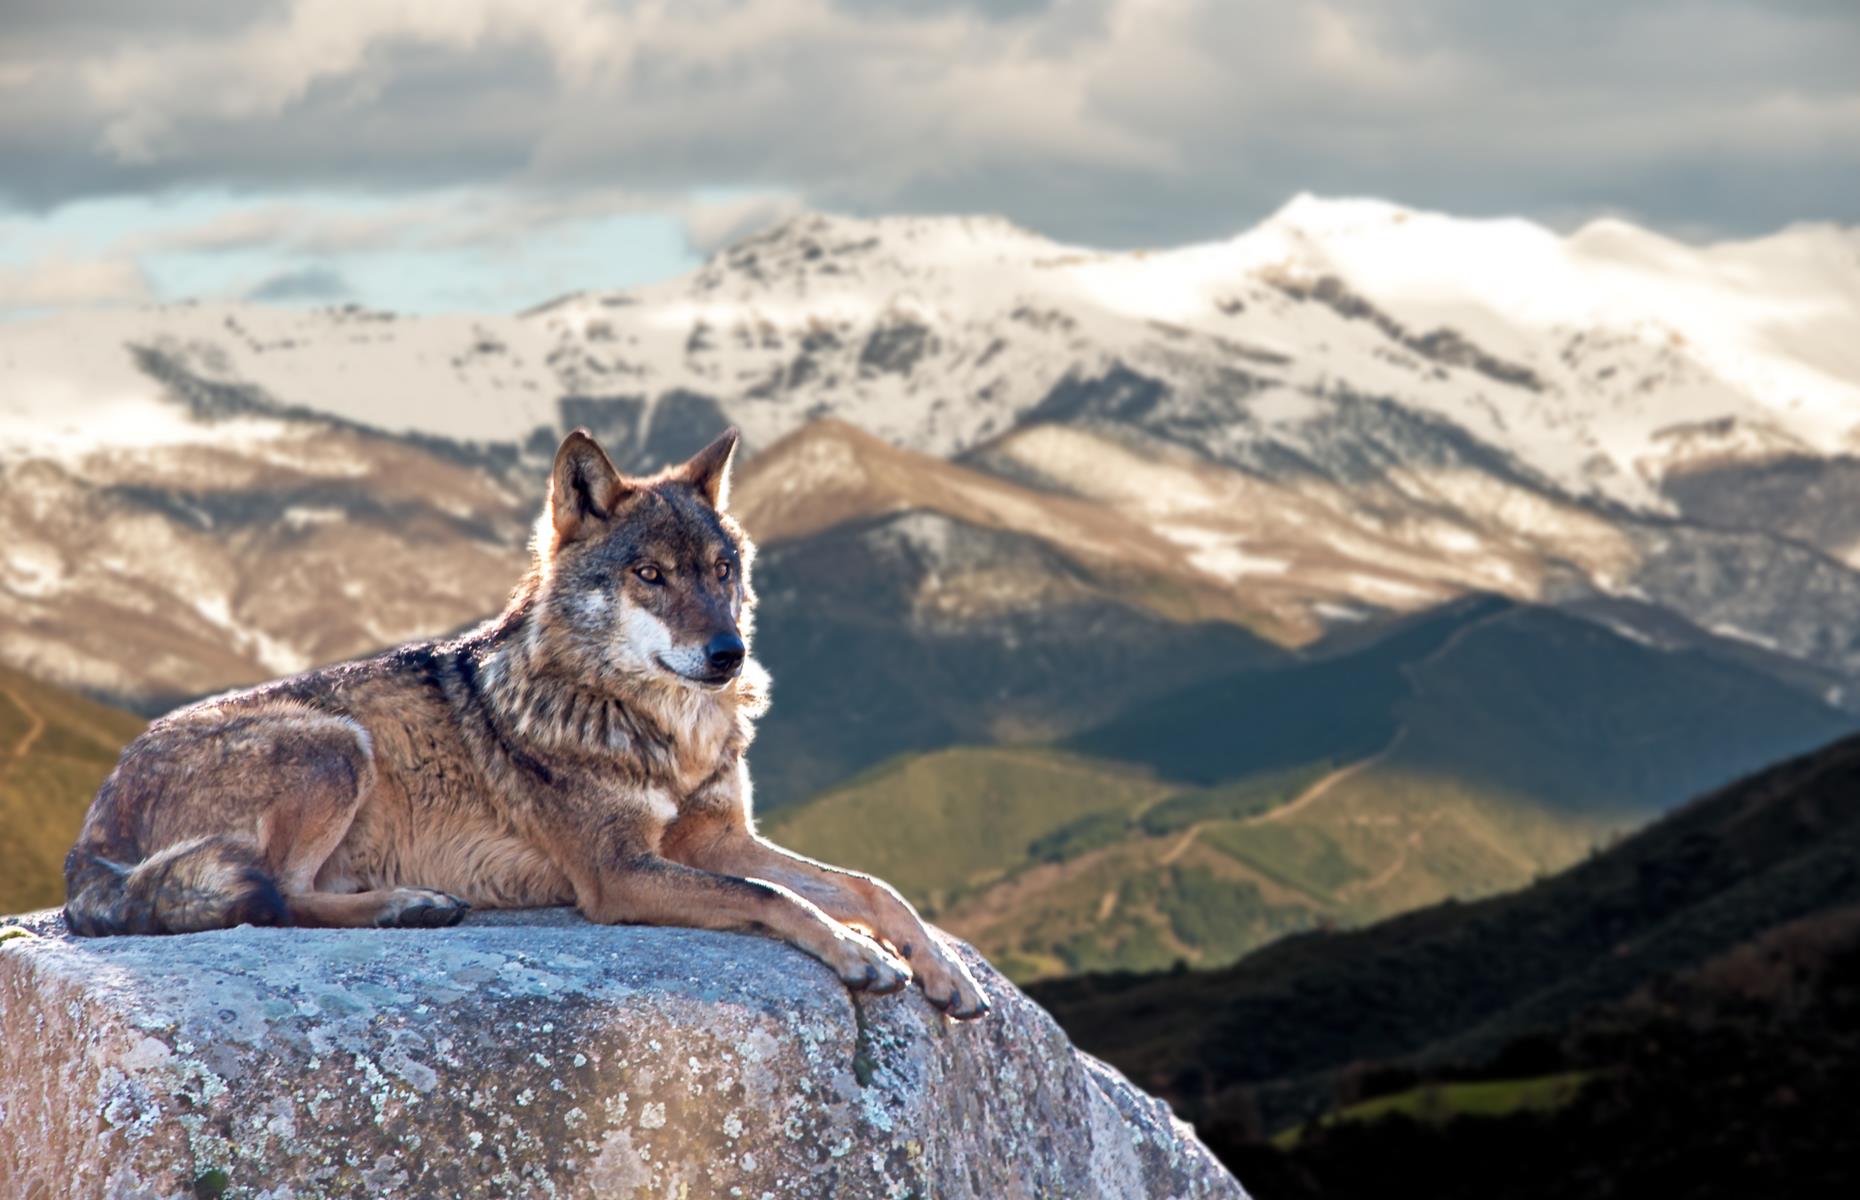 <p><a href="https://www.naturetrek.co.uk/tours/wolf-watching-in-spain">Naturetrek</a> has built up a detailed knowledge of wolf-watching in the area and offers wildlife enthusiasts a great chance of sighting wolves in Europe. Its tours – which take place largely on foot – include accommodation in beautiful local farmhouses and also give guests a chance to spot rare wildcats, curmudgeonly wild boar and mighty Cantabrian brown bears.</p>